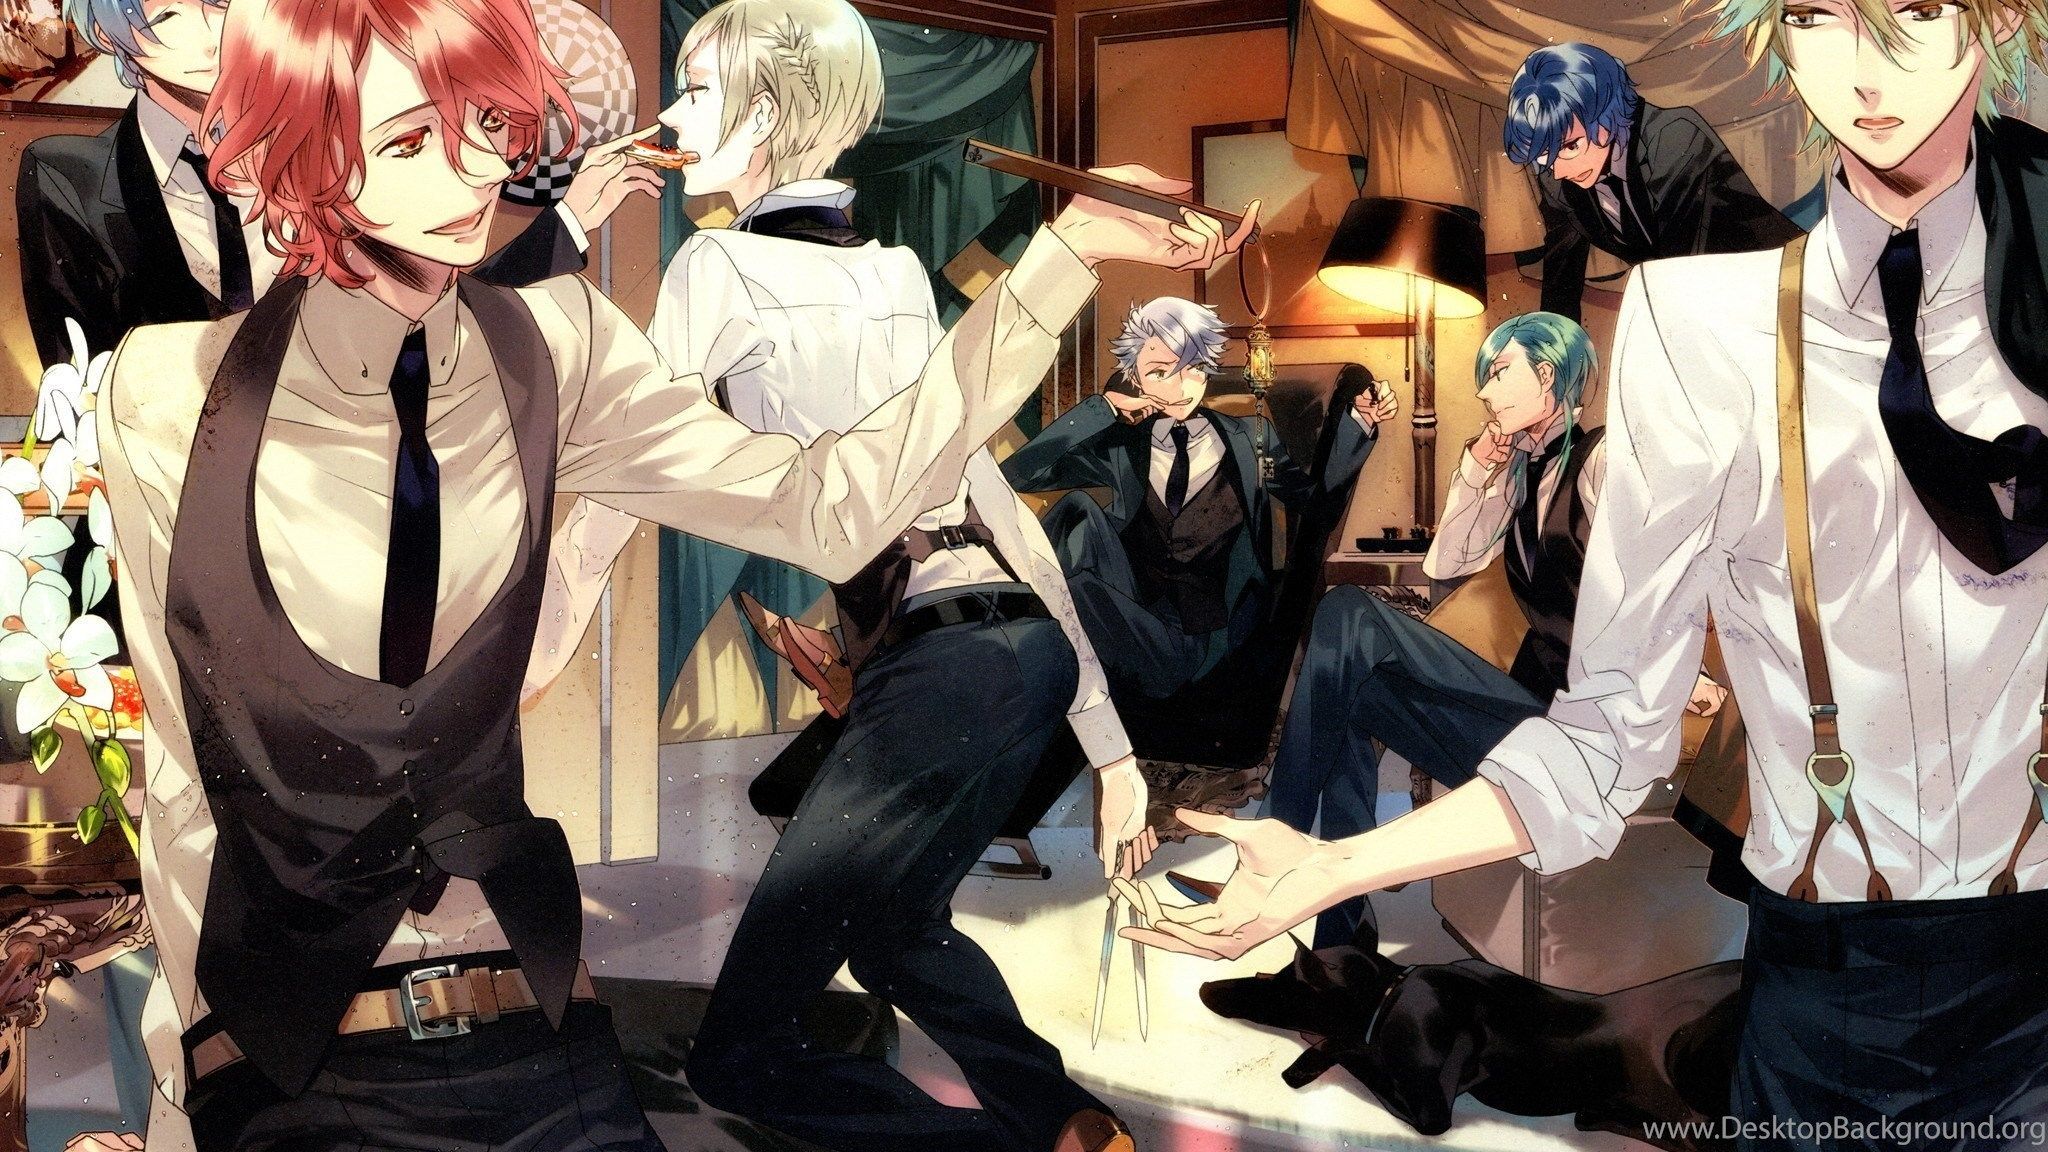 Starry Sky Series Anime Group Characters Friend Males Wallpaper